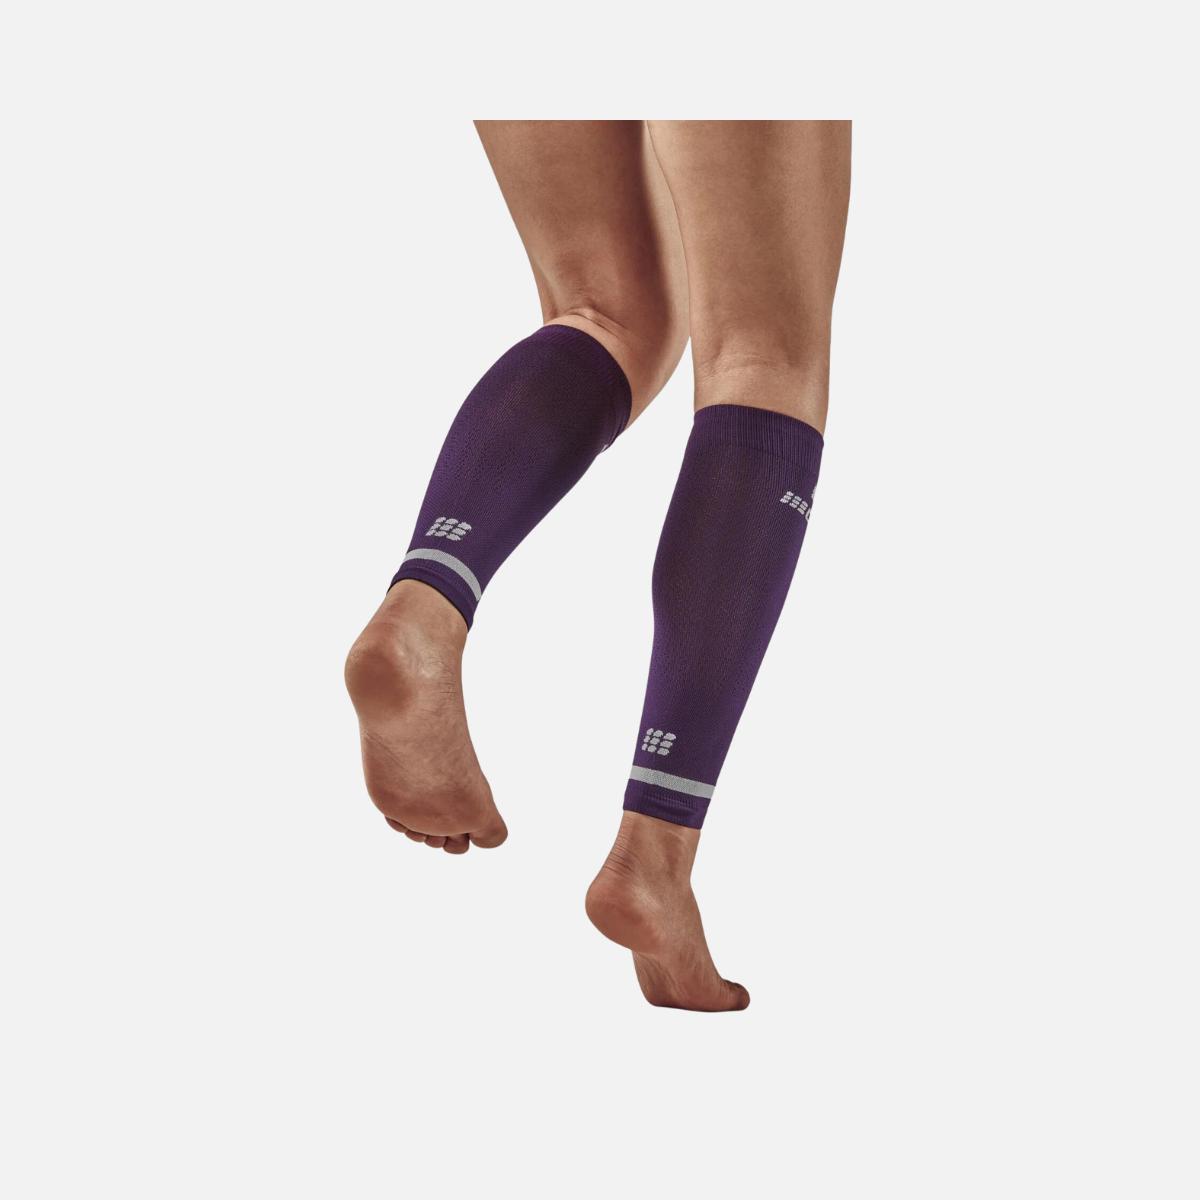 Cep The Run Compression 4.0 Women Calf Sleeves -Violet